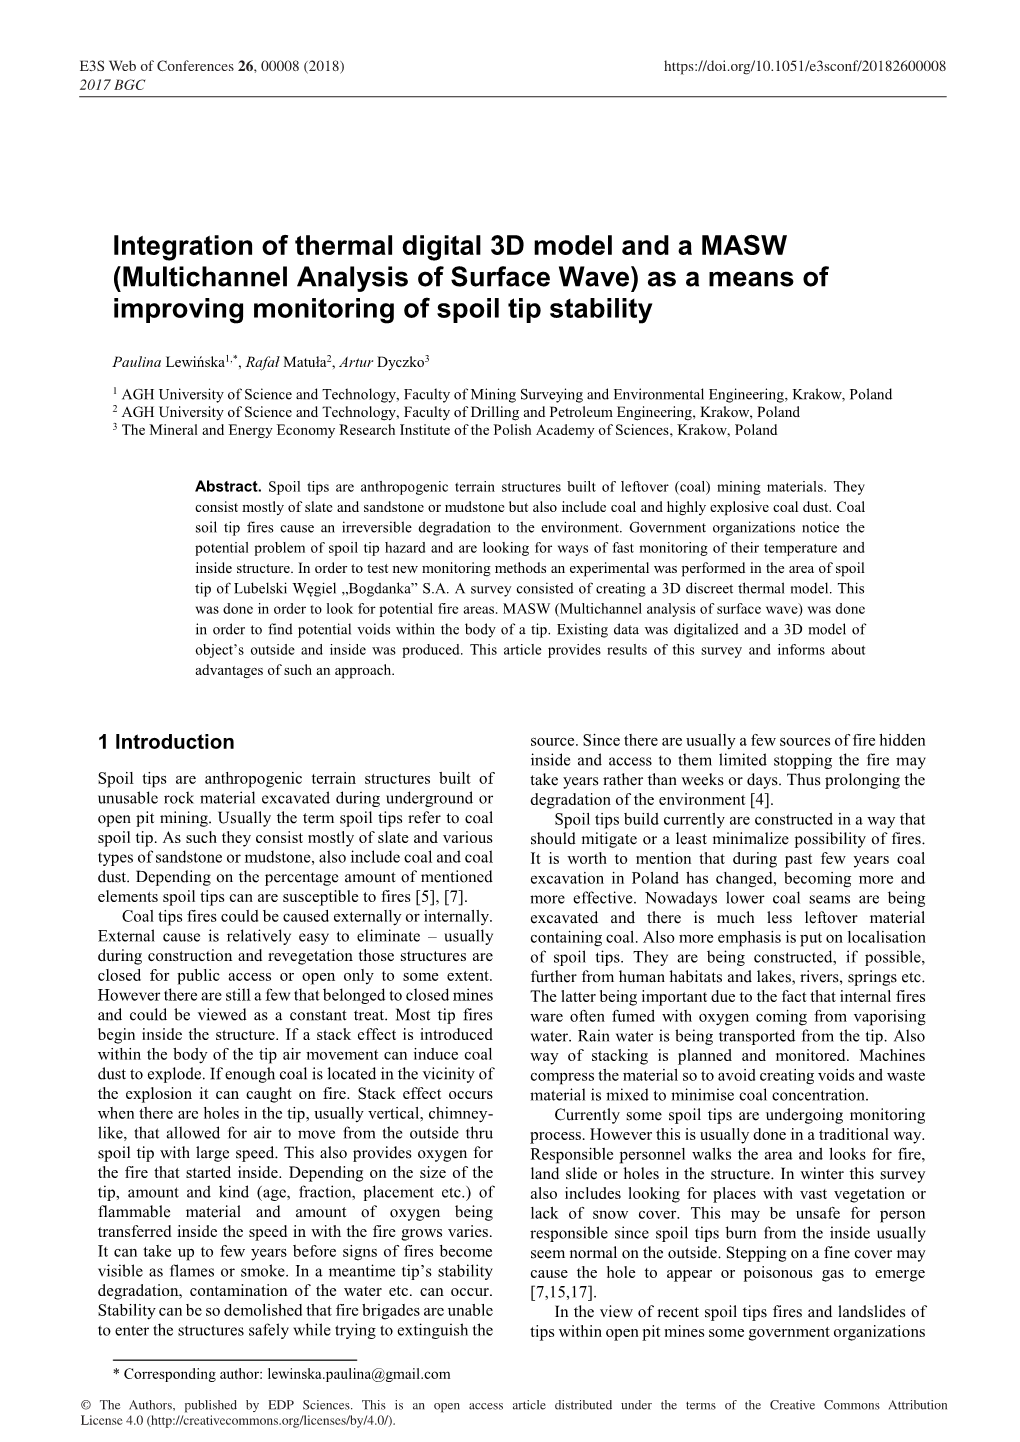 Integration of Thermal Digital 3D Model and a MASW (Multichannel Analysis of Surface Wave) As a Means of Improving Monitoring of Spoil Tip Stability